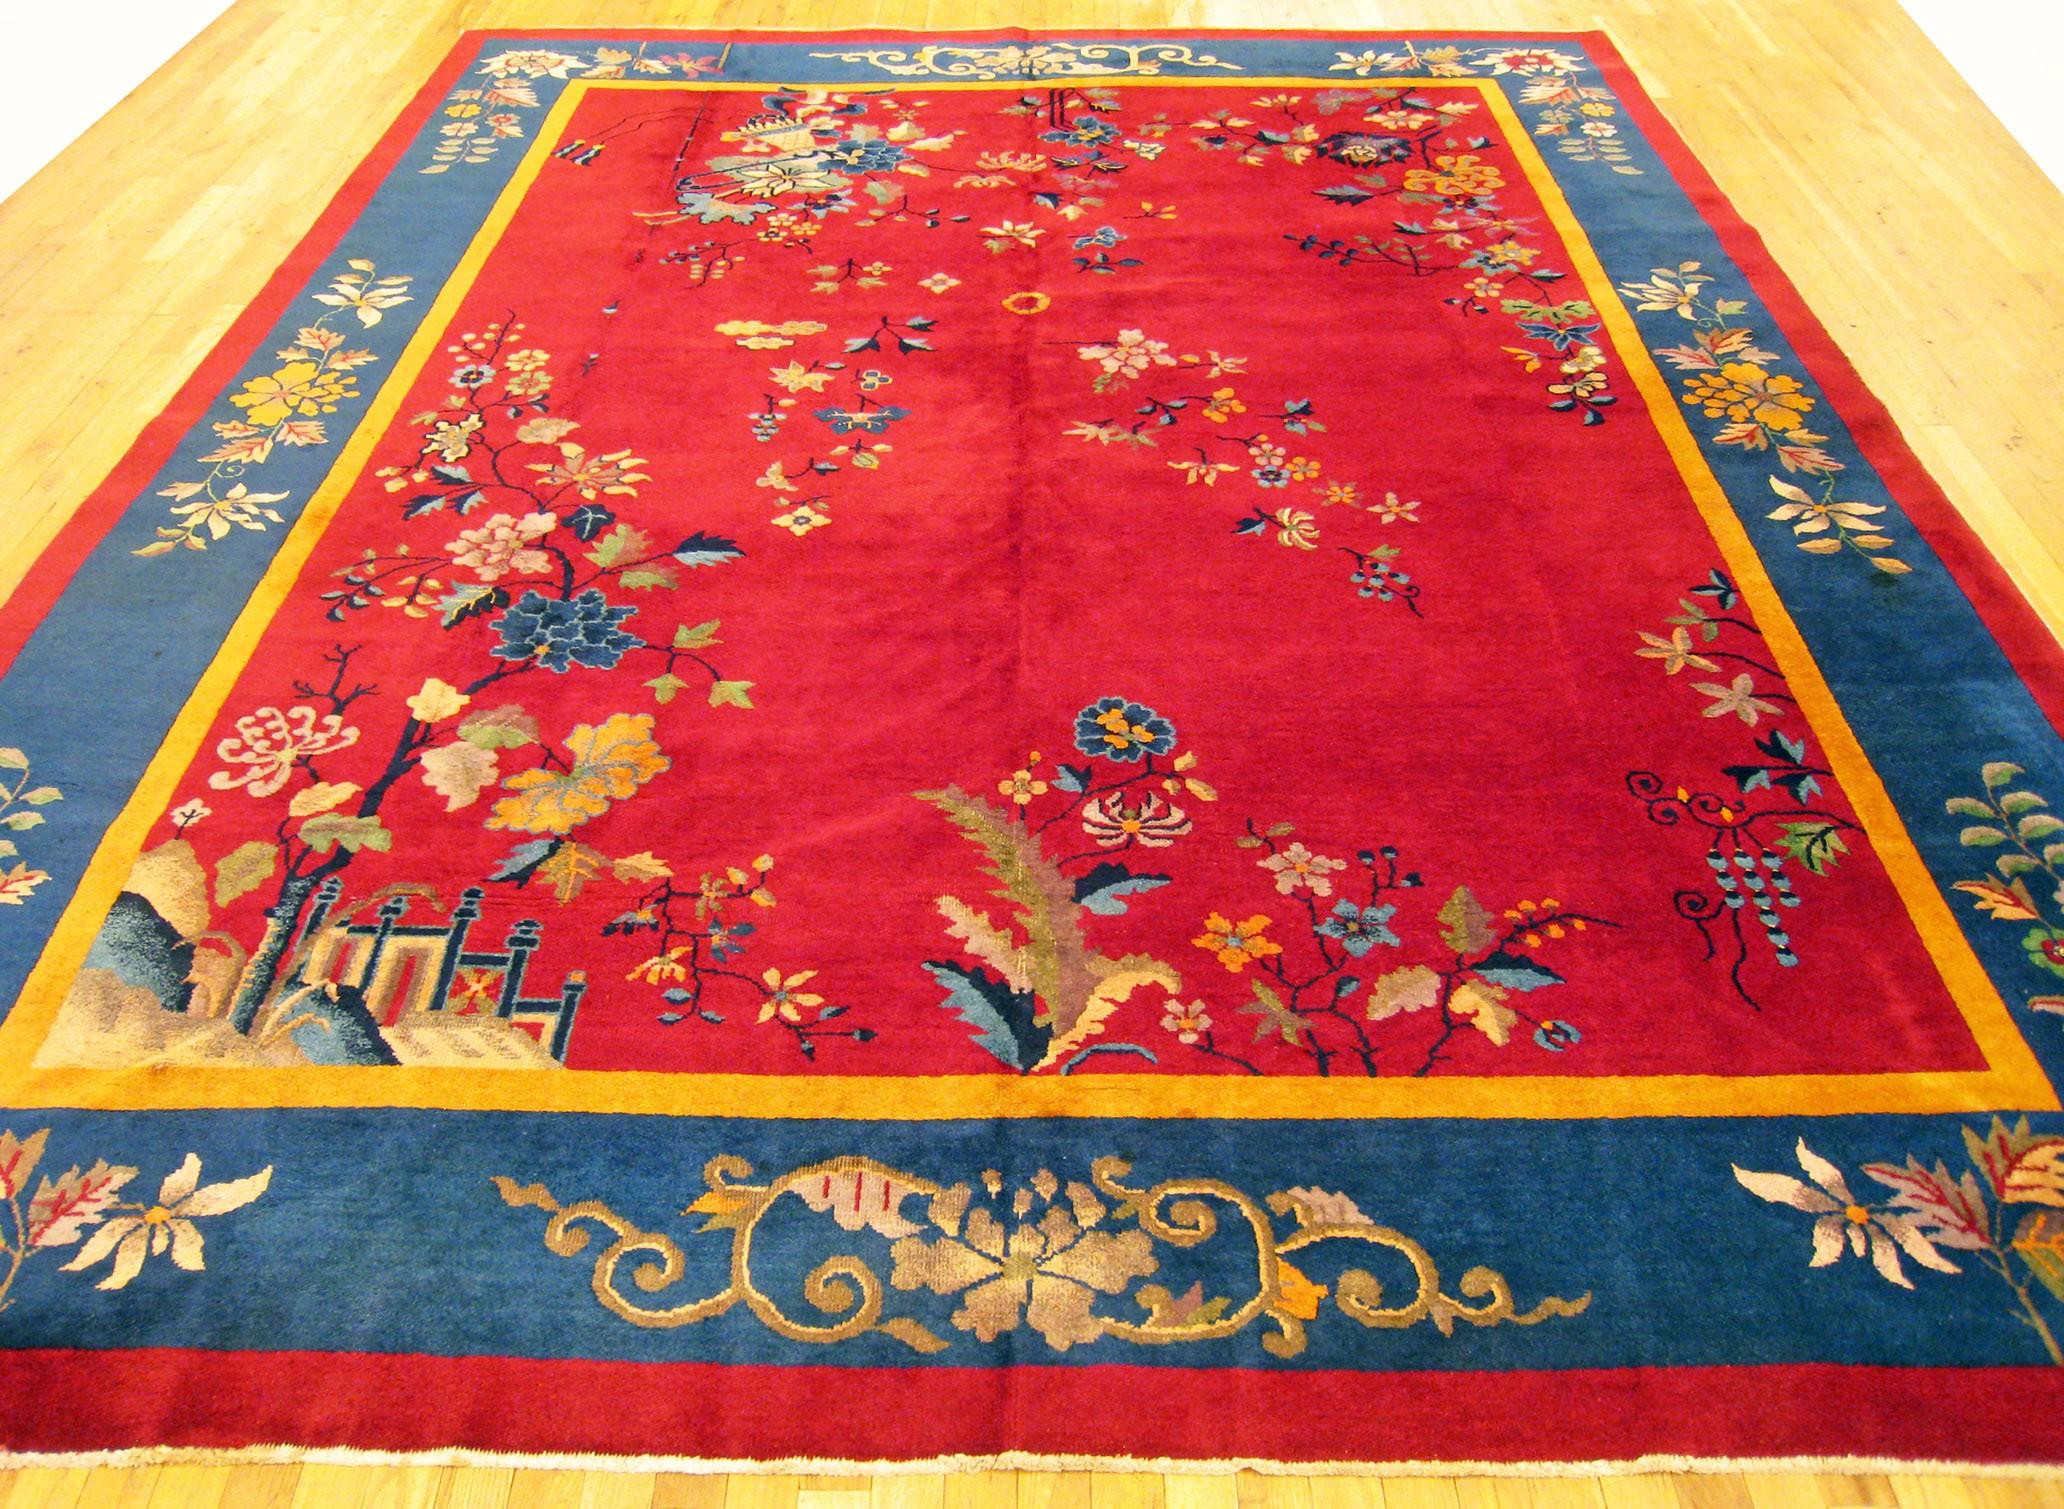 Antique Chinese Art deco rug, room size, circa 1920.

A one-of-a-kind antique Chinese Art deco oriental carpet, hand-knotted with medium thickness wool pile. This beautiful rug features art deco and chinese motifs on a large red open field, with a